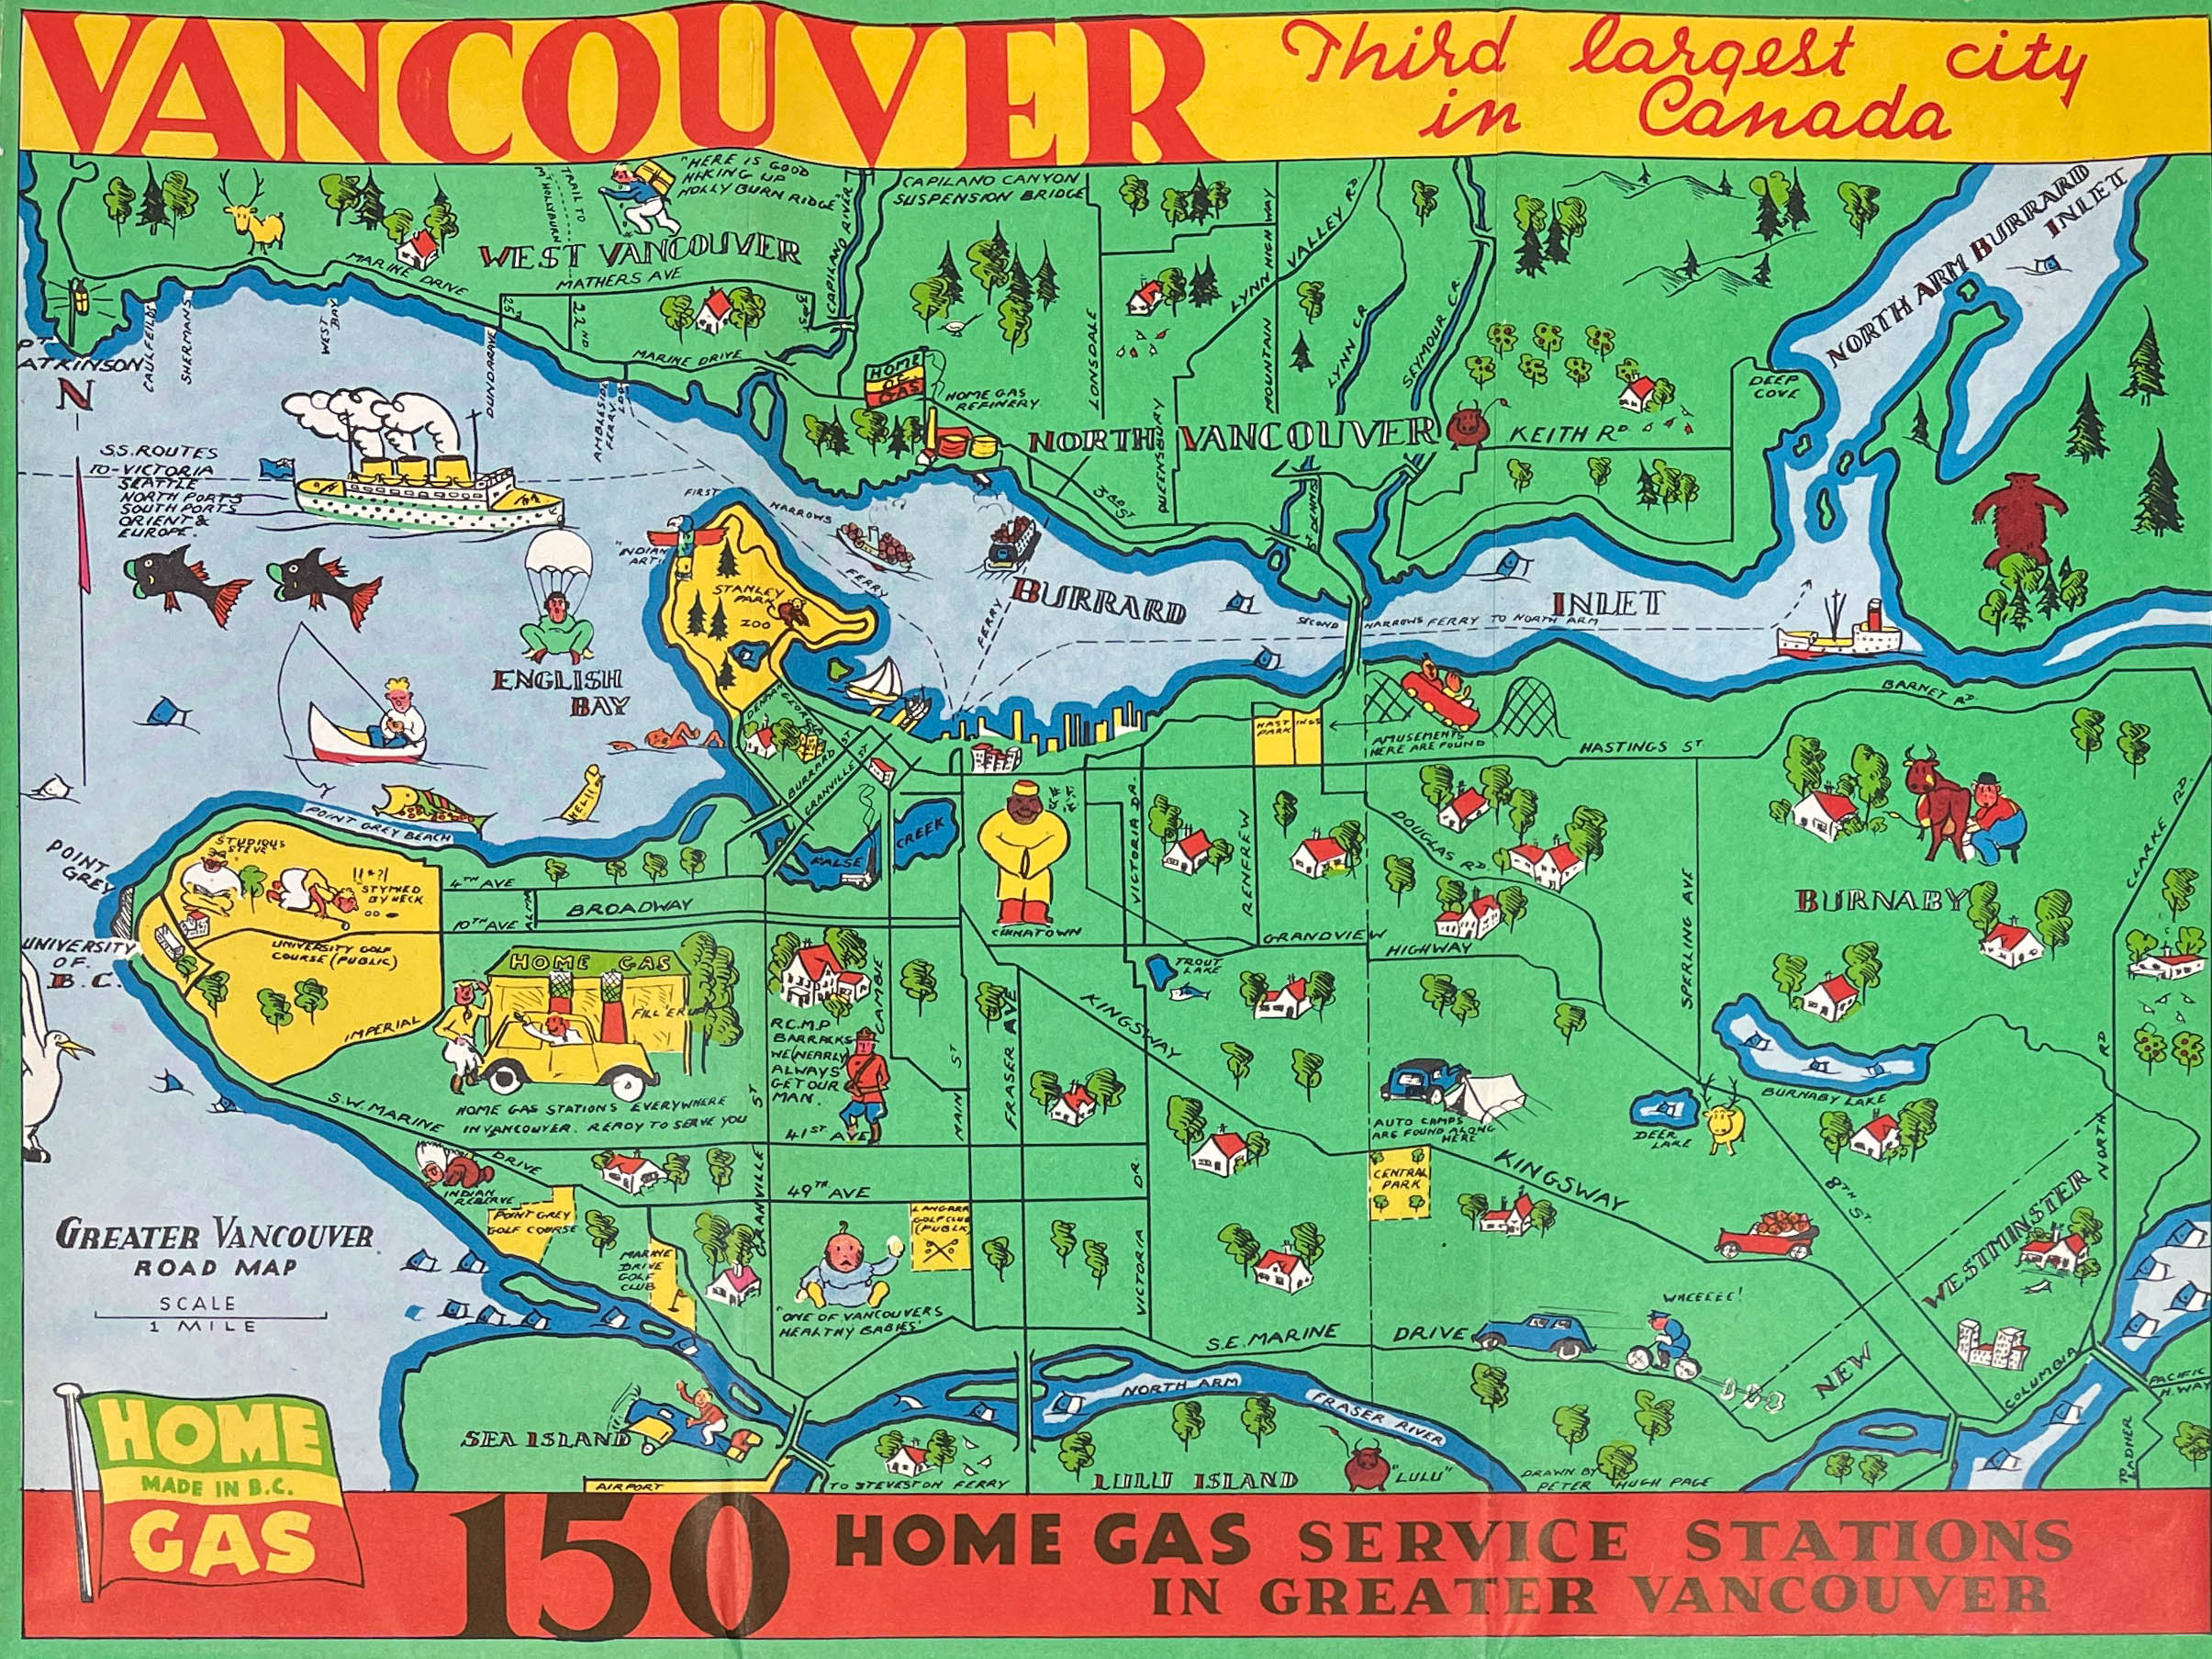 Hugh Page pictorial map of Vancouver from 1836.